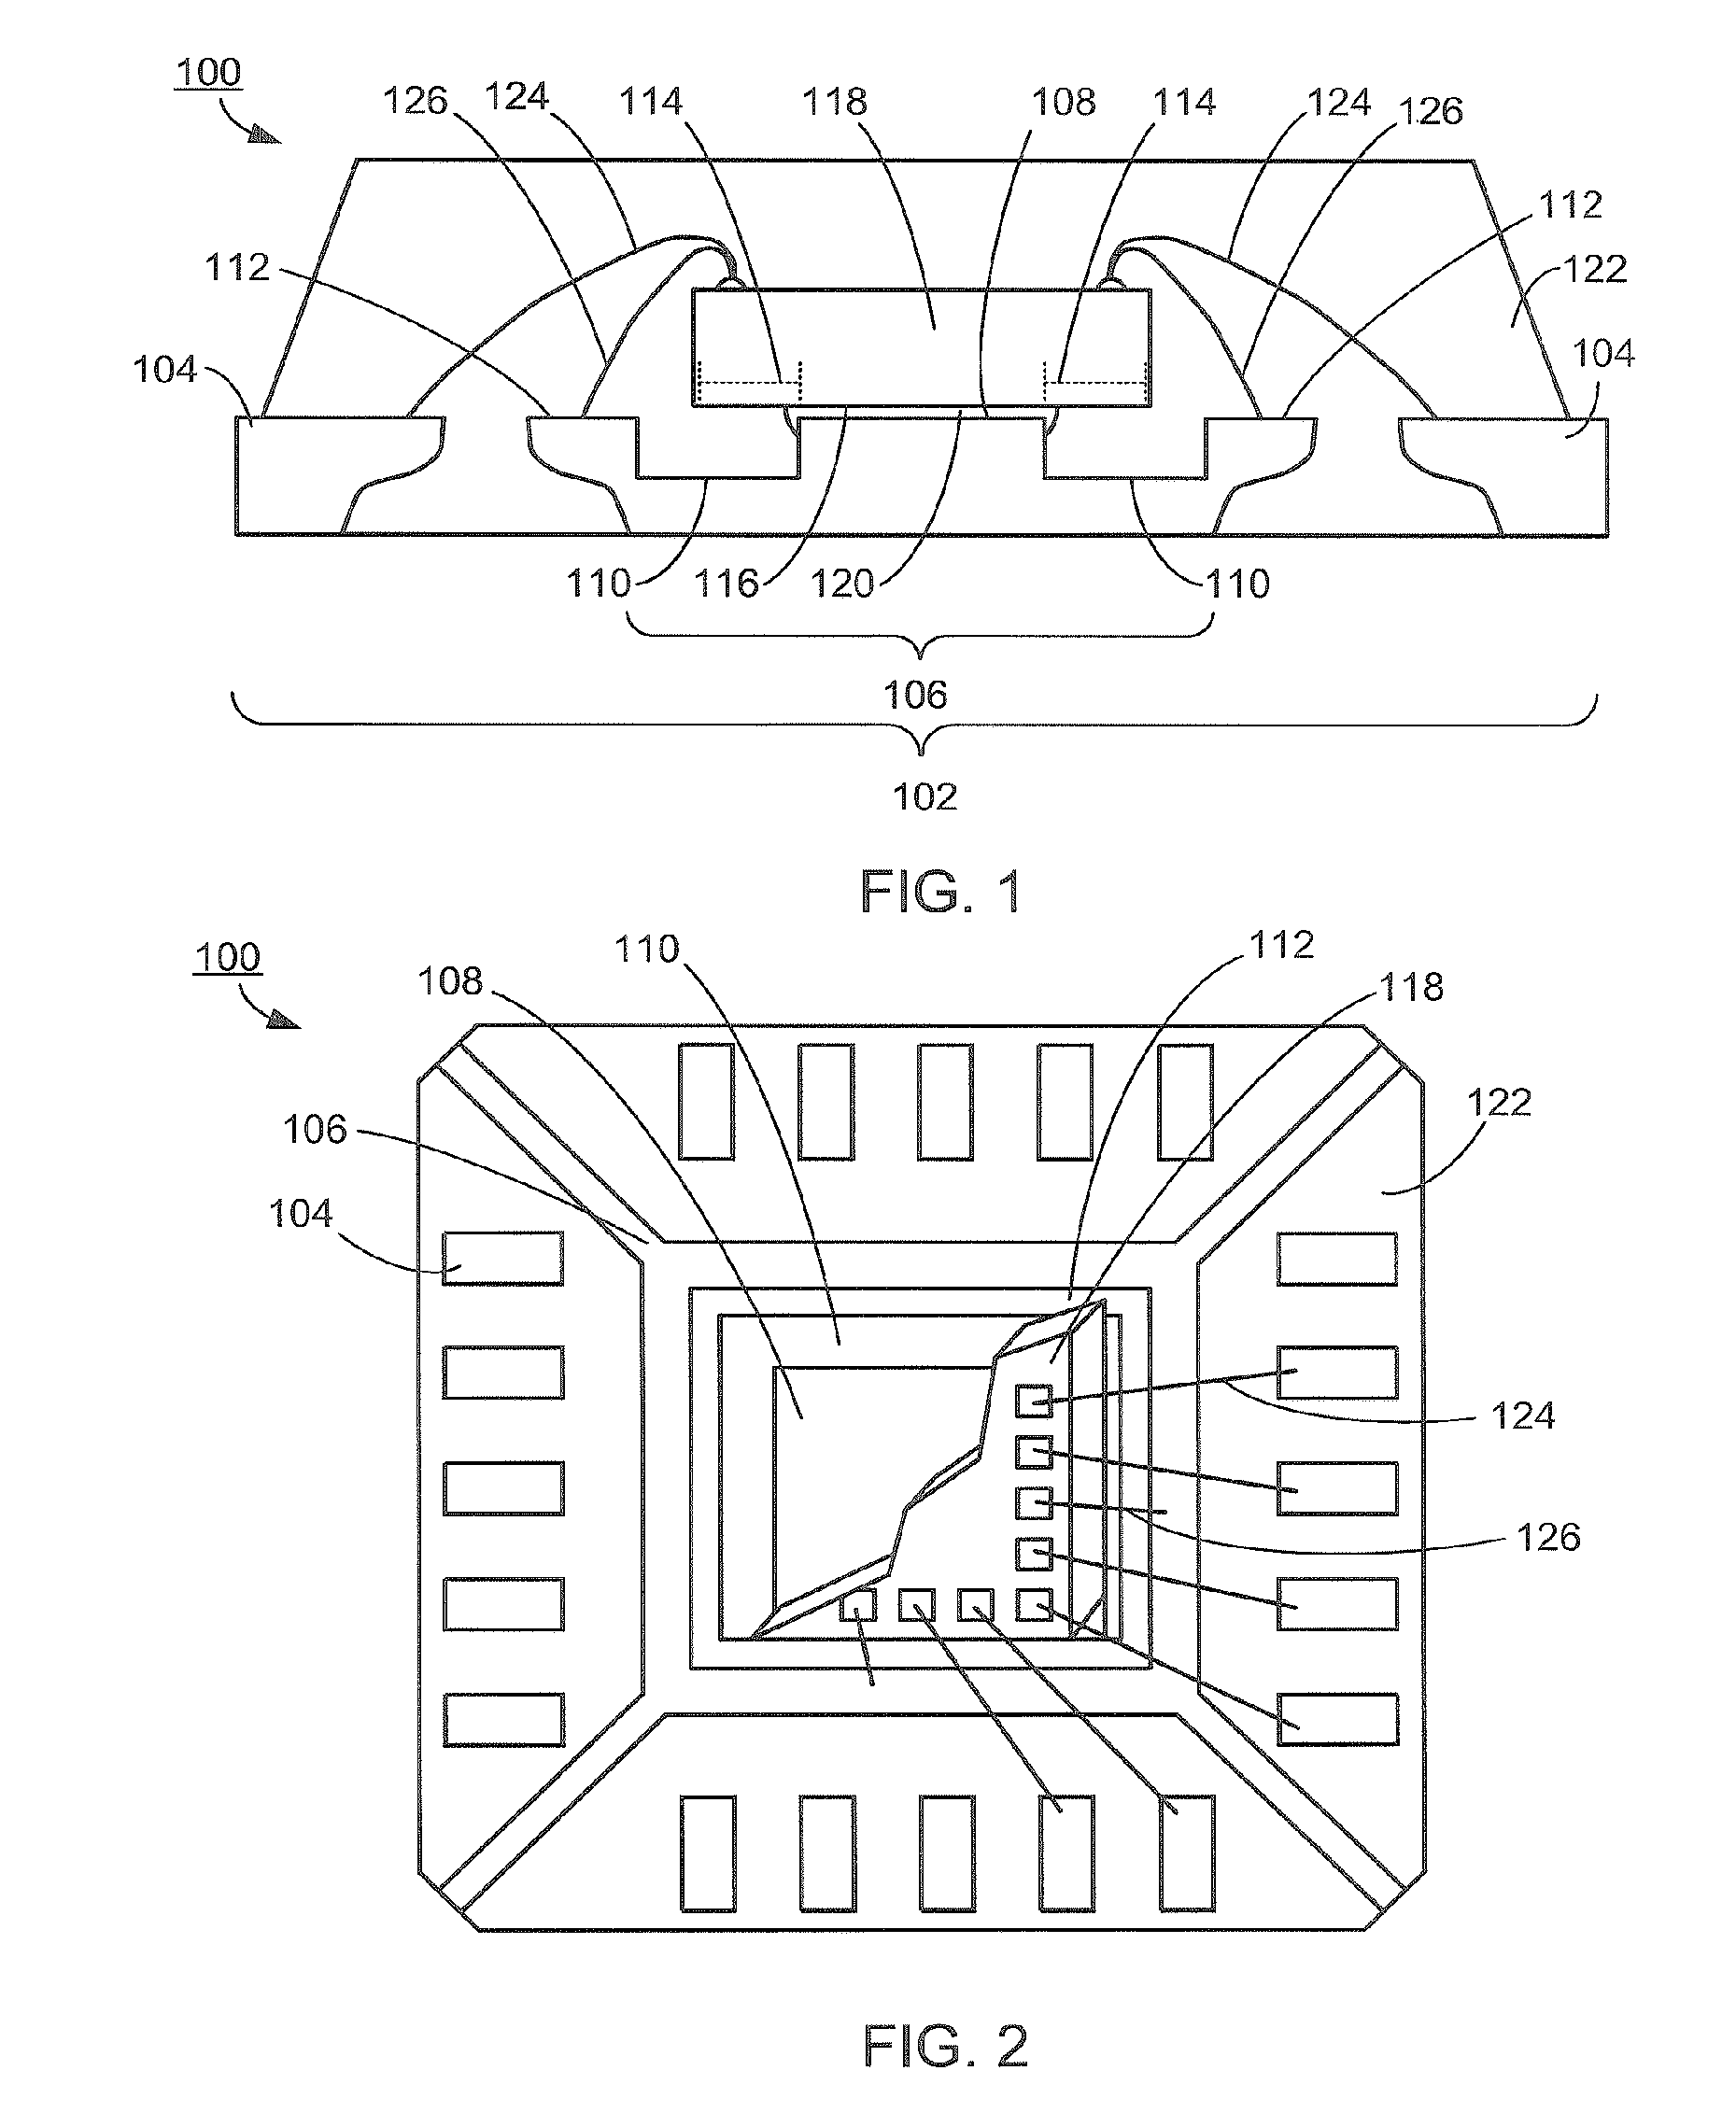 Integrated circuit package system with multi-surface die attach pad